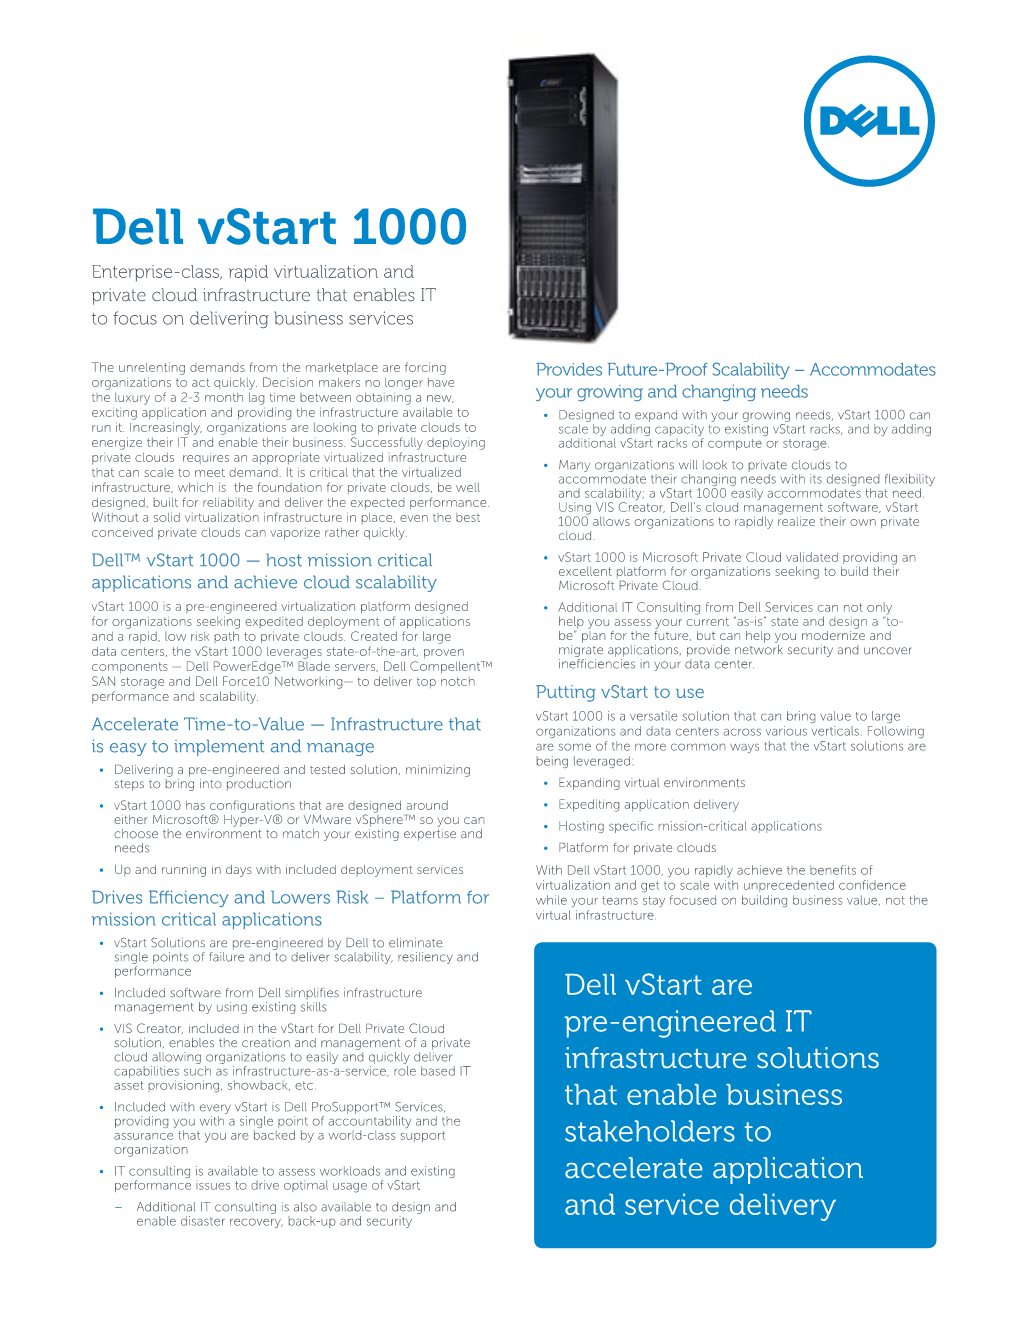 Dell Vstart 1000 Enterprise-Class, Rapid Virtualization and Private Cloud Infrastructure That Enables IT to Focus on Delivering Business Services